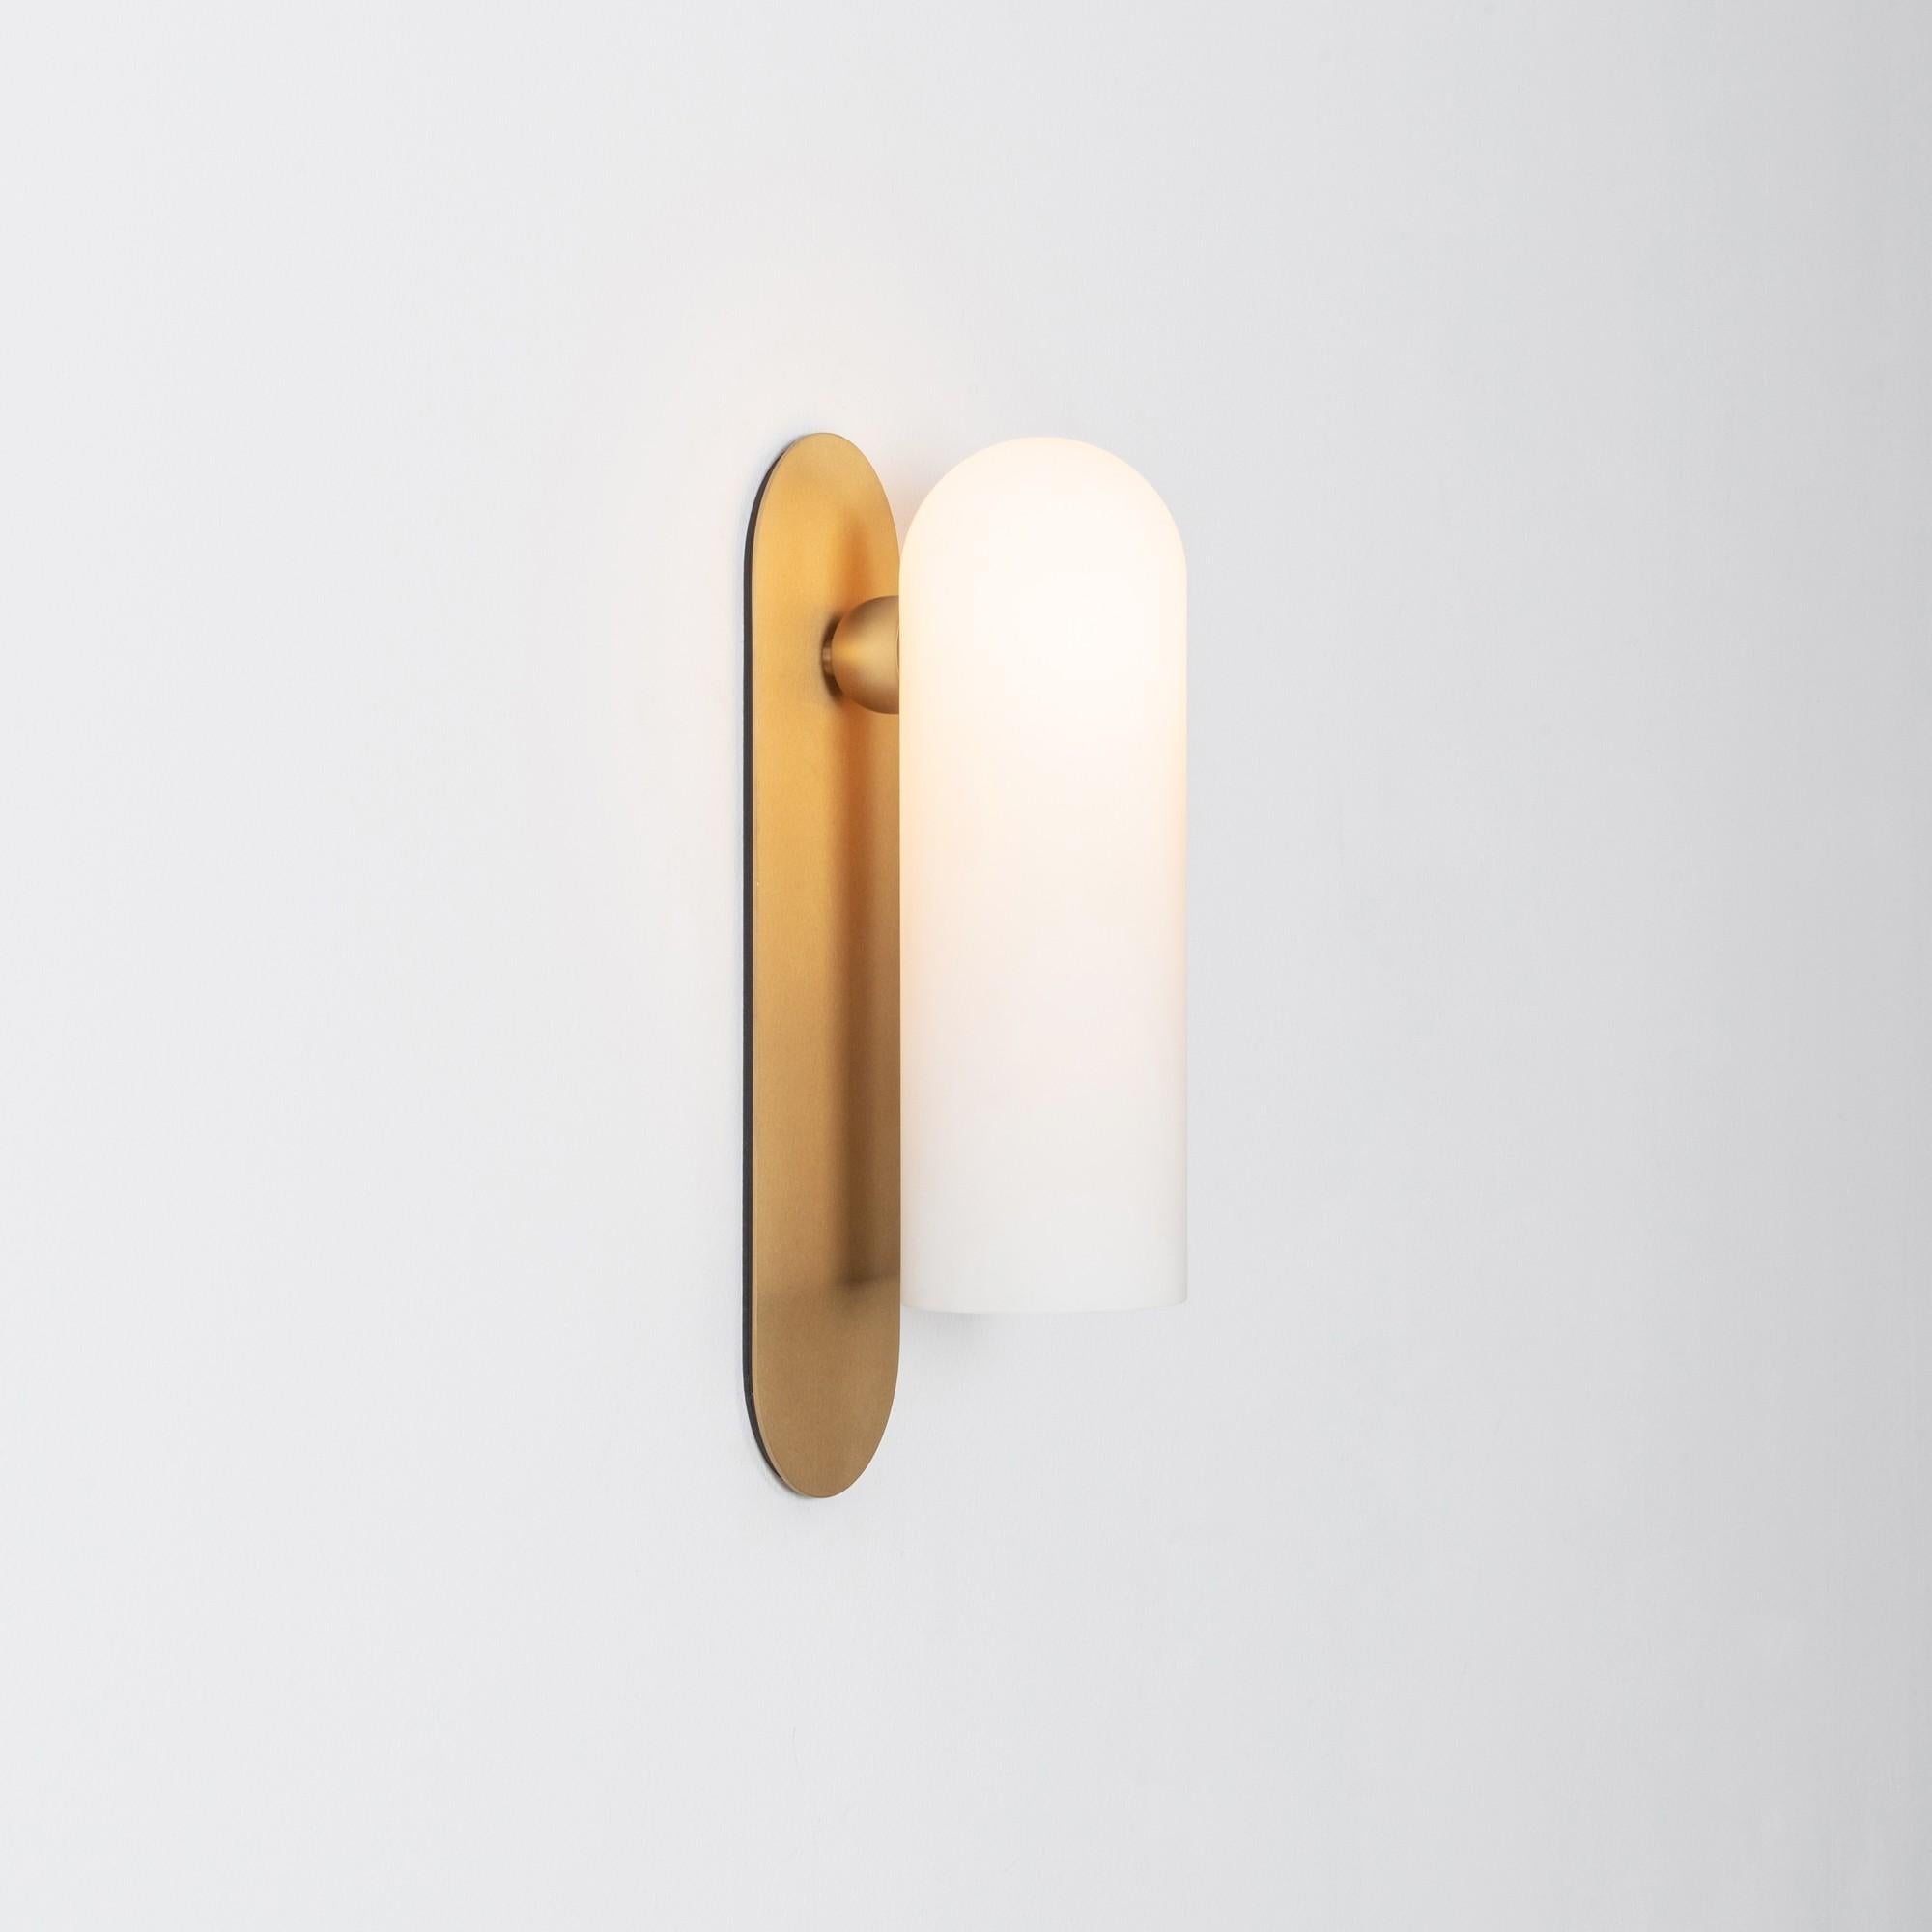 Brass large sconce by Schwung
Dimensions: W 10.5 x D 14 x H 38 cm
Materials: Brass, frosted glass

Finishes available: Black gunmetal, polished nickel, brass

Schwung is a German word, and loosely defined, means energy or momentumm of a positive